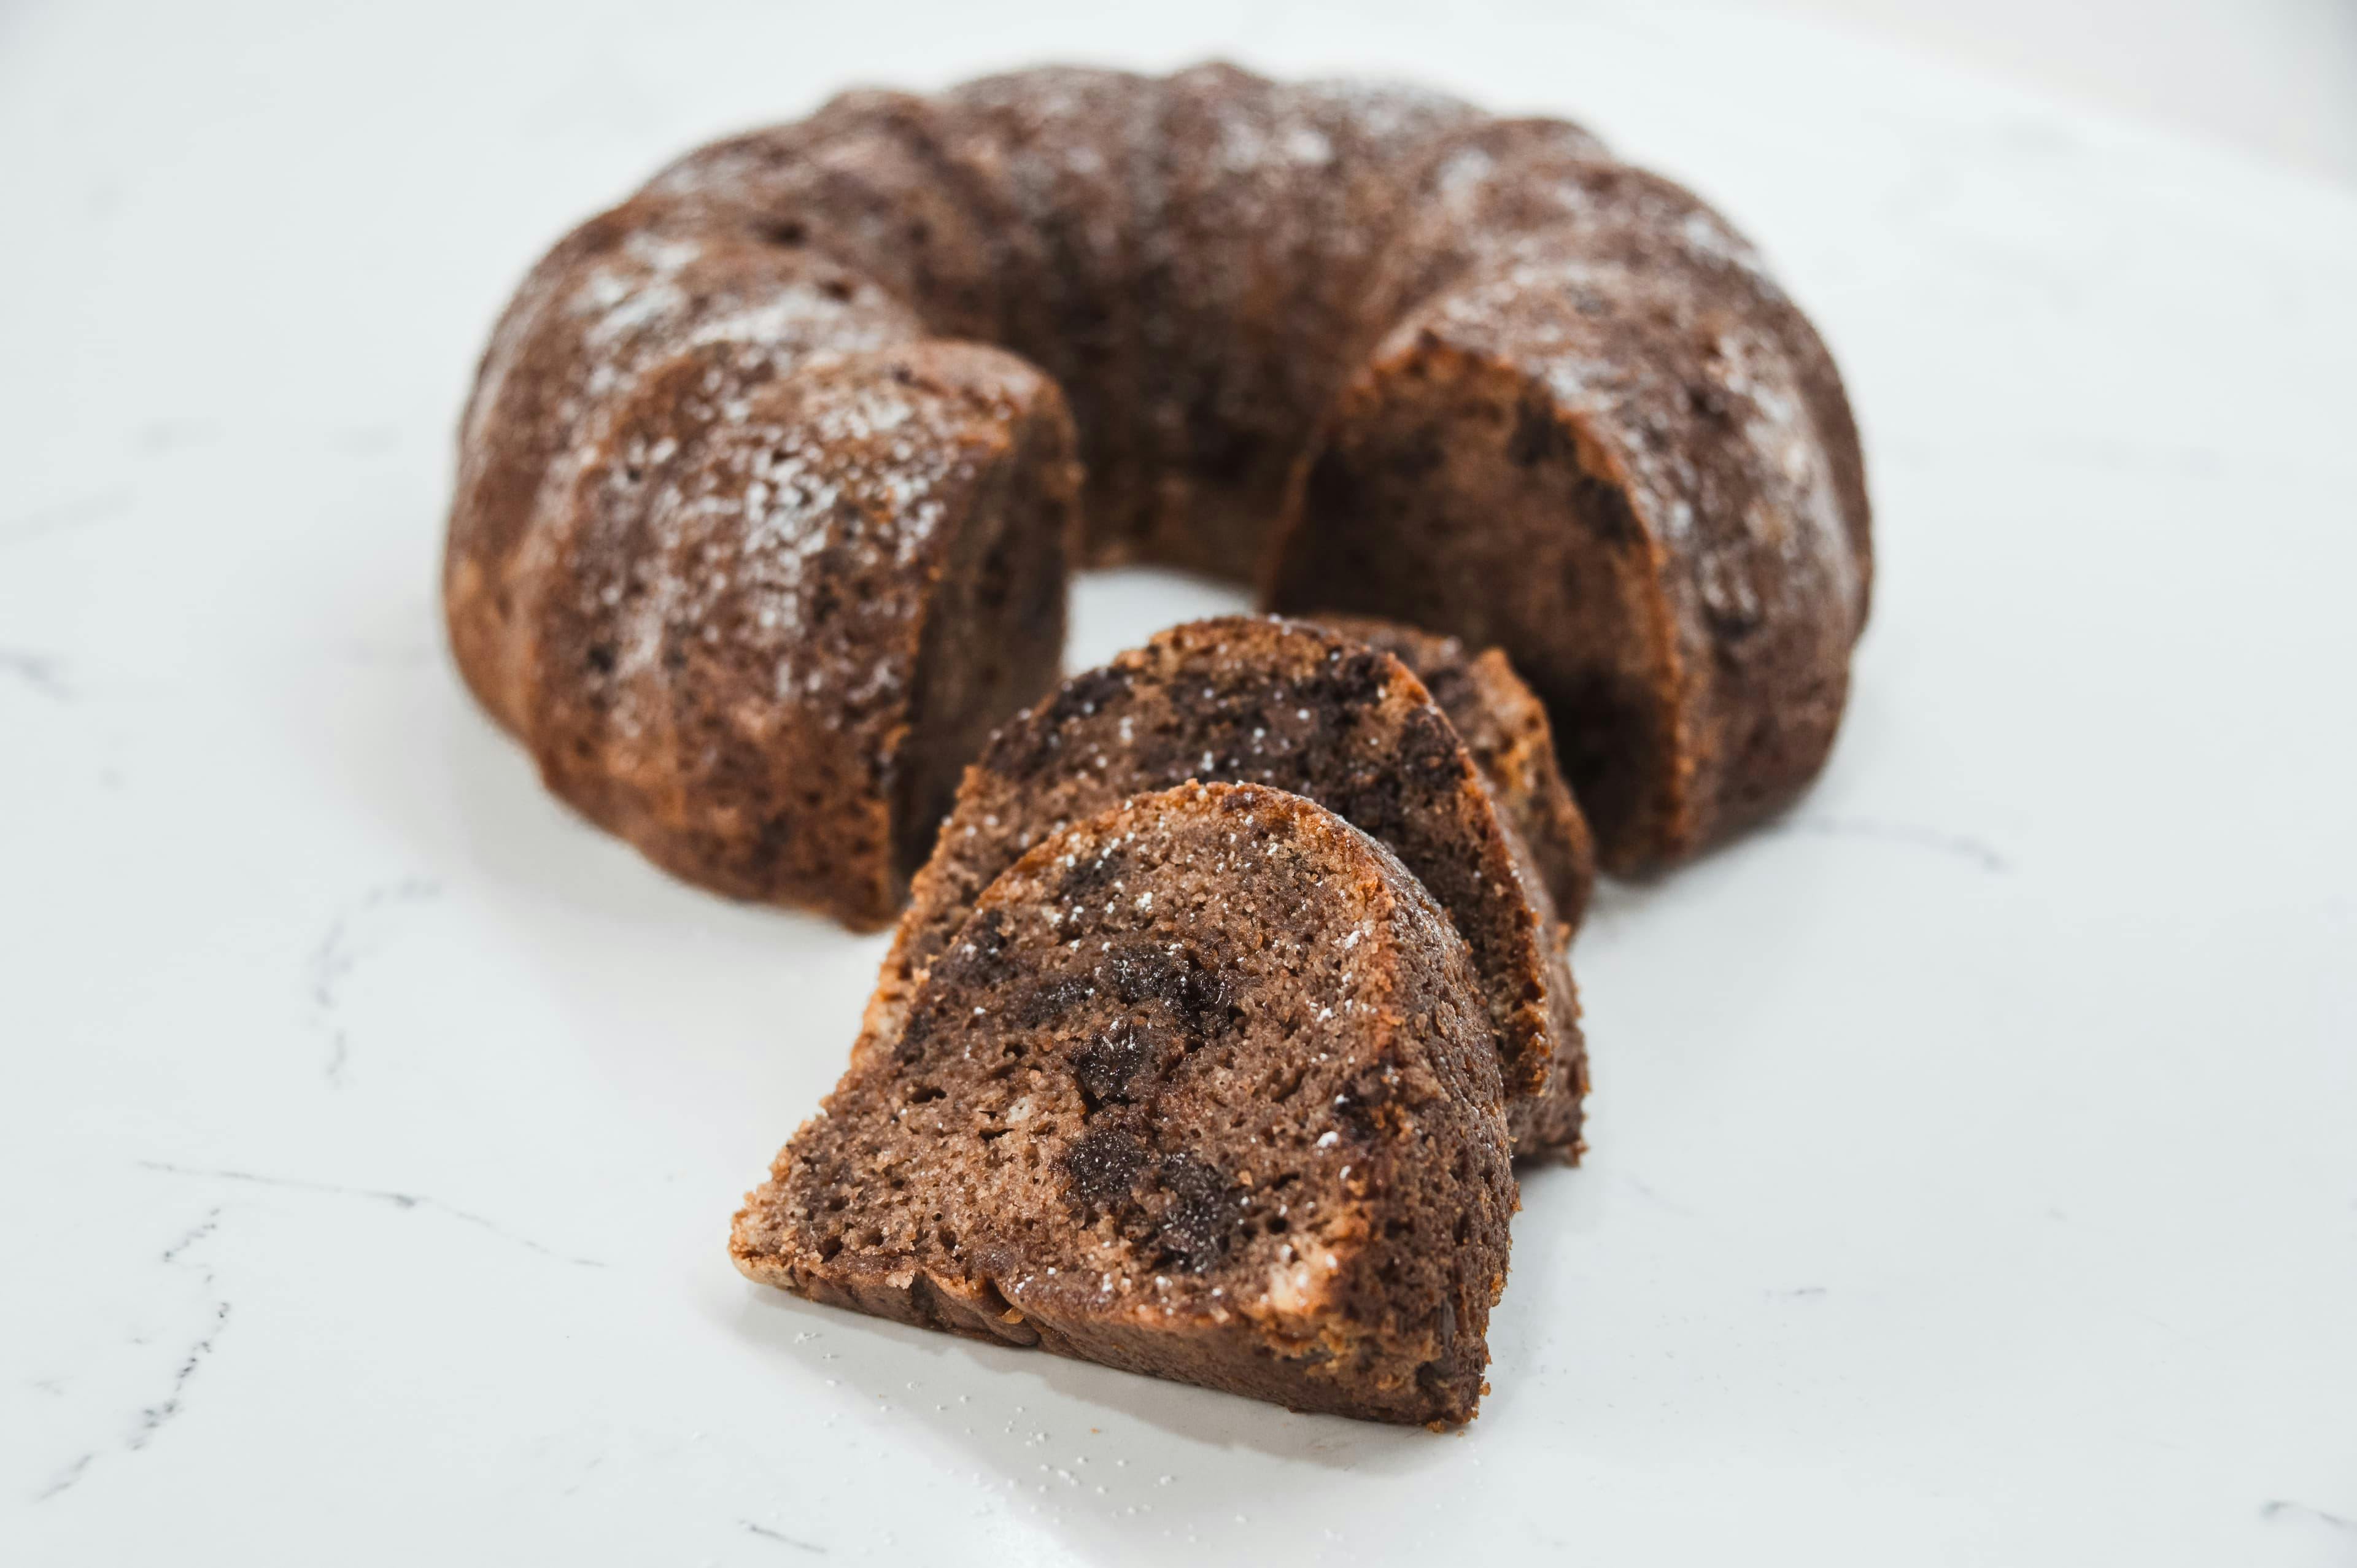 The Holly Furtick recipe: 'Chocolate Chip Pound Cake'